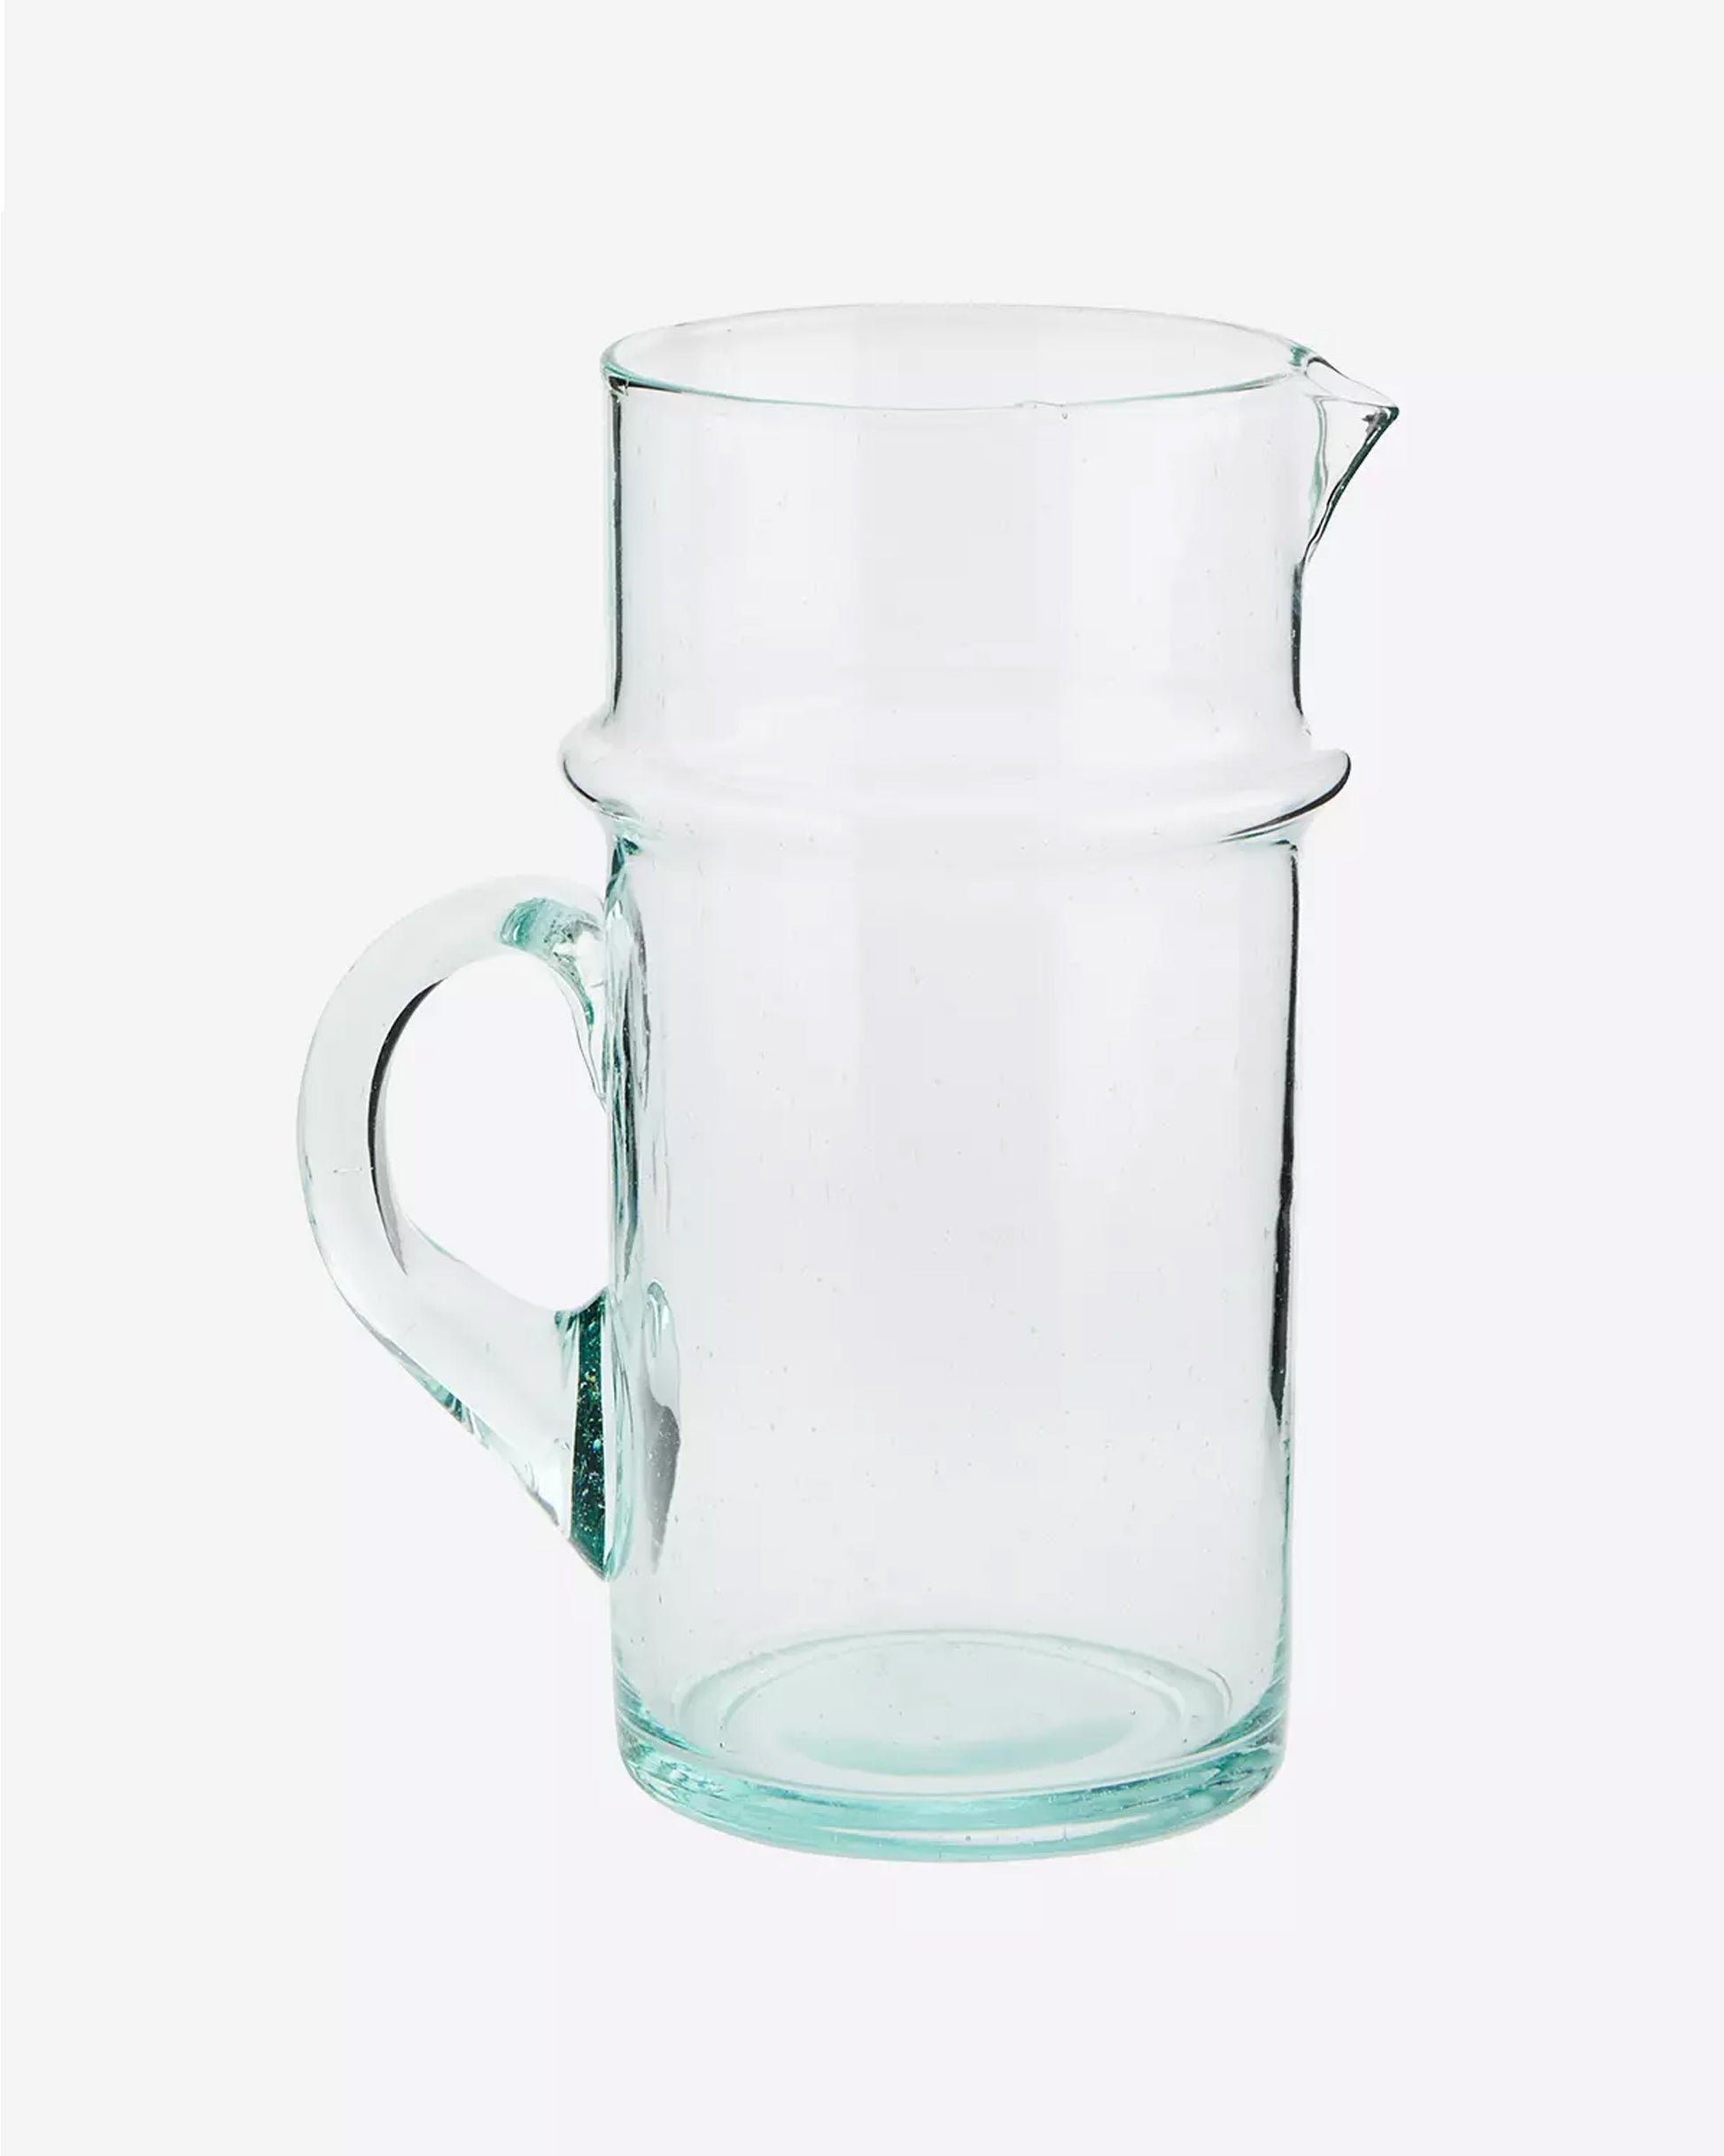 The Every Space 1 Litre Beldi Glass Jug with original Moroccan Beldi glass by Madam Stoltz